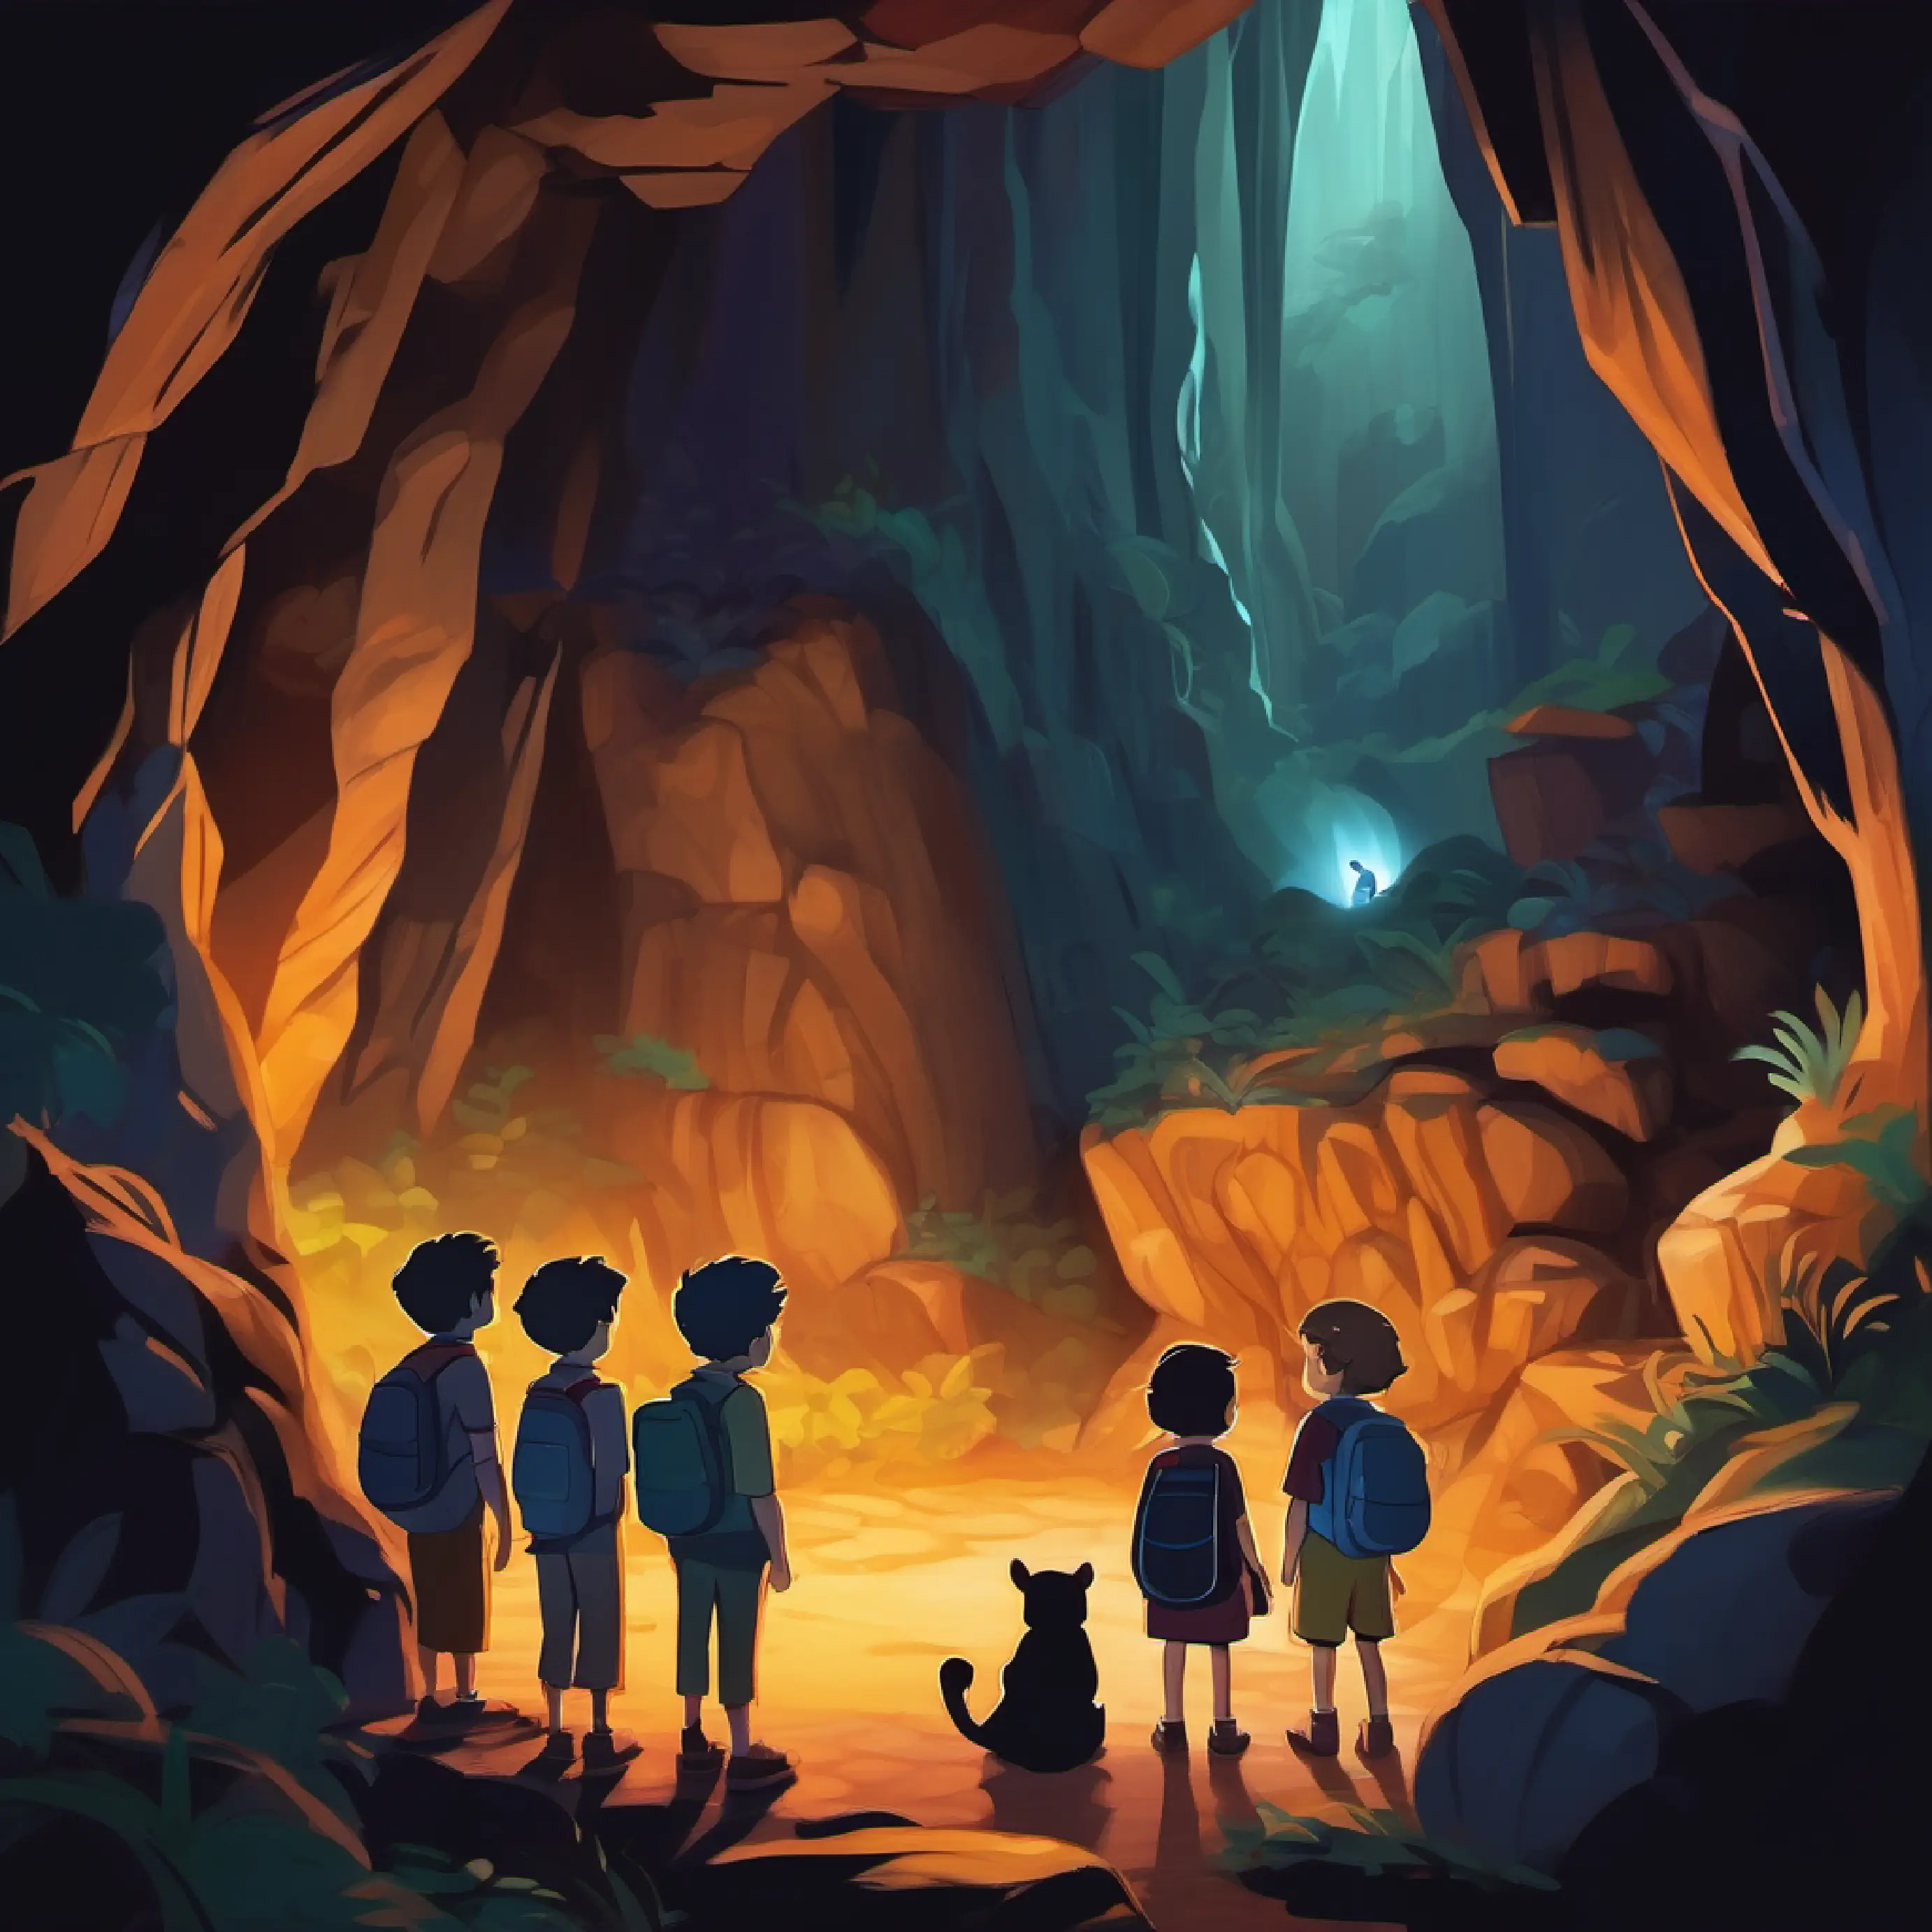 The number friends find a dark cave; Five is being brave.